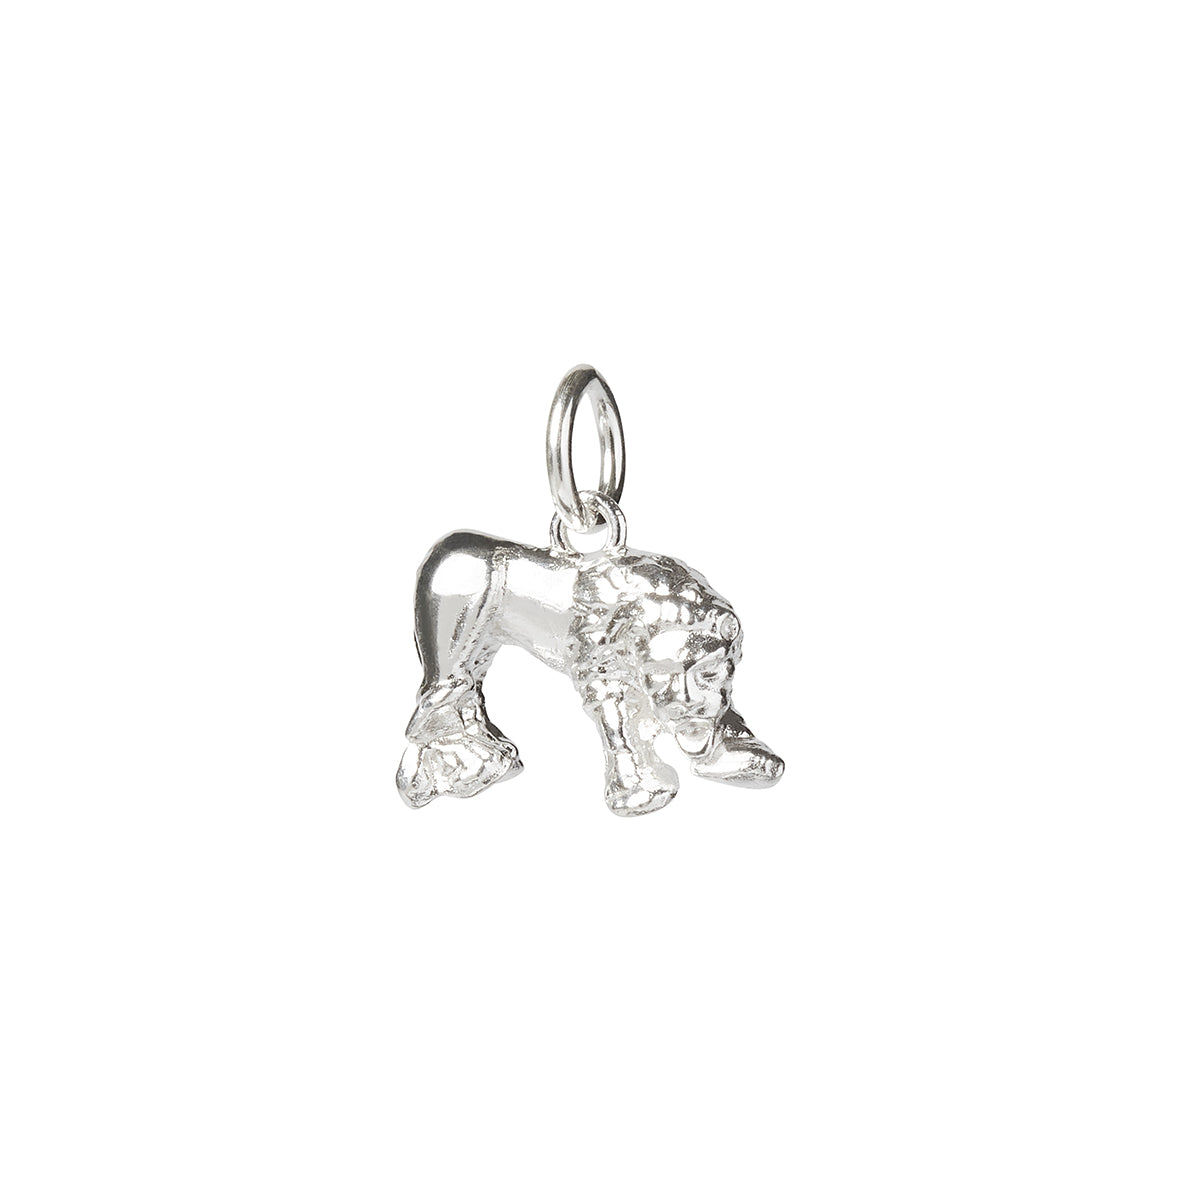 A silver charm of the Lion of Corbridge statue found at the Corbridge Roman site, a silver charm with a silver jump ring on a white background made by Kirsty Taylor Goldsmiths, Corbridge Northumberland